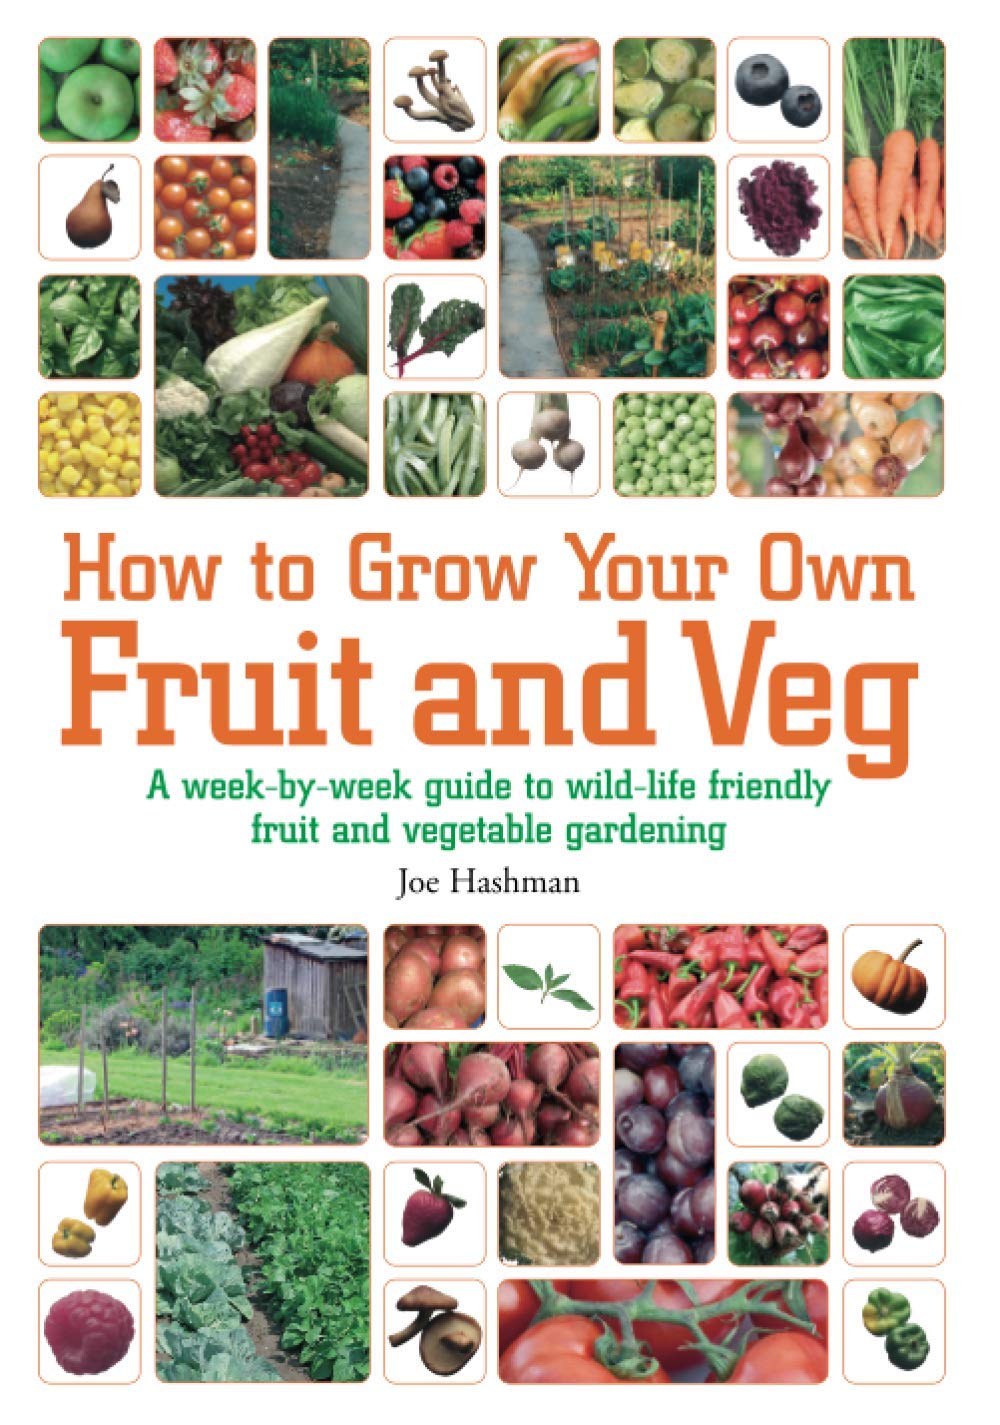 How To Grow Your Own Fruit and Veg: A Week-by-week Guide to Wild-life Friendly Fruit and Vegetable Gardening